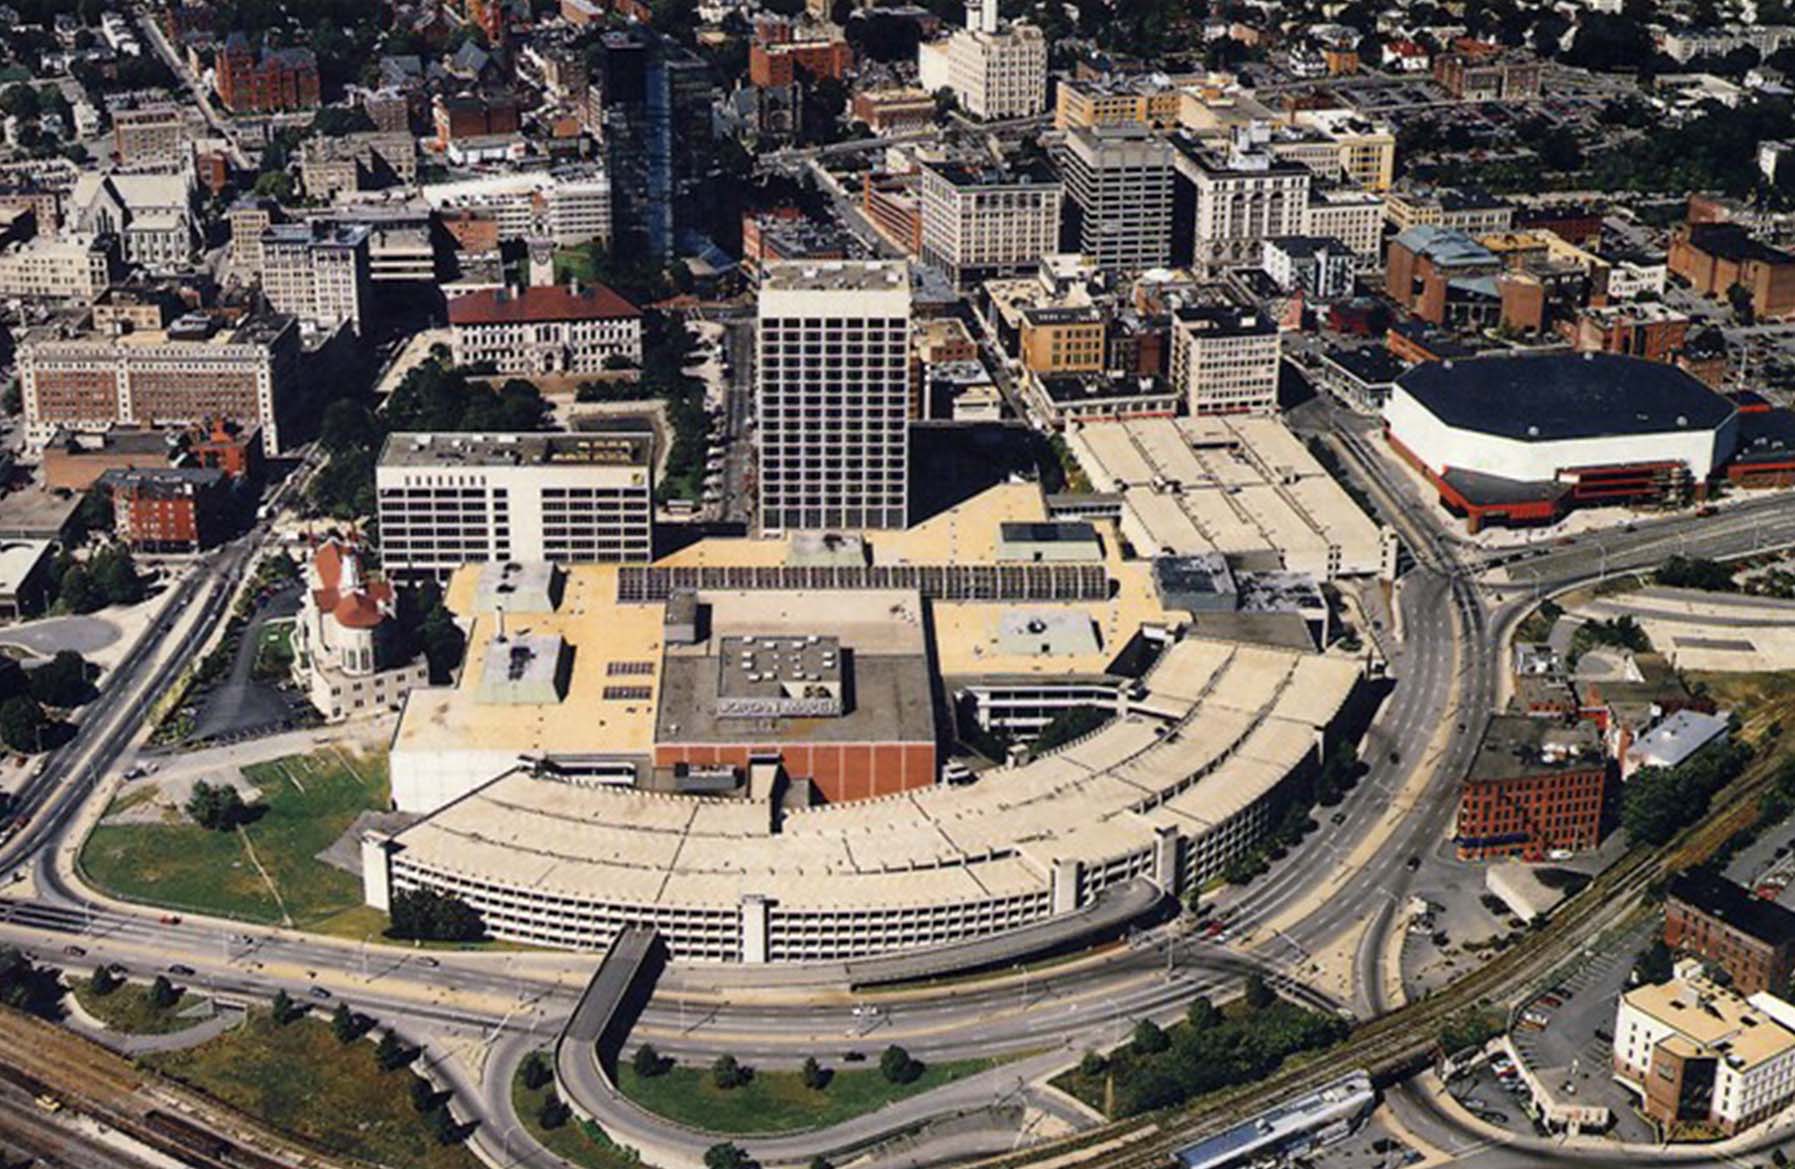 [Caption: Image Source: Andri Kyrychok Blog] Master Planning Architects - Worcester Center Galleria Aerial Before